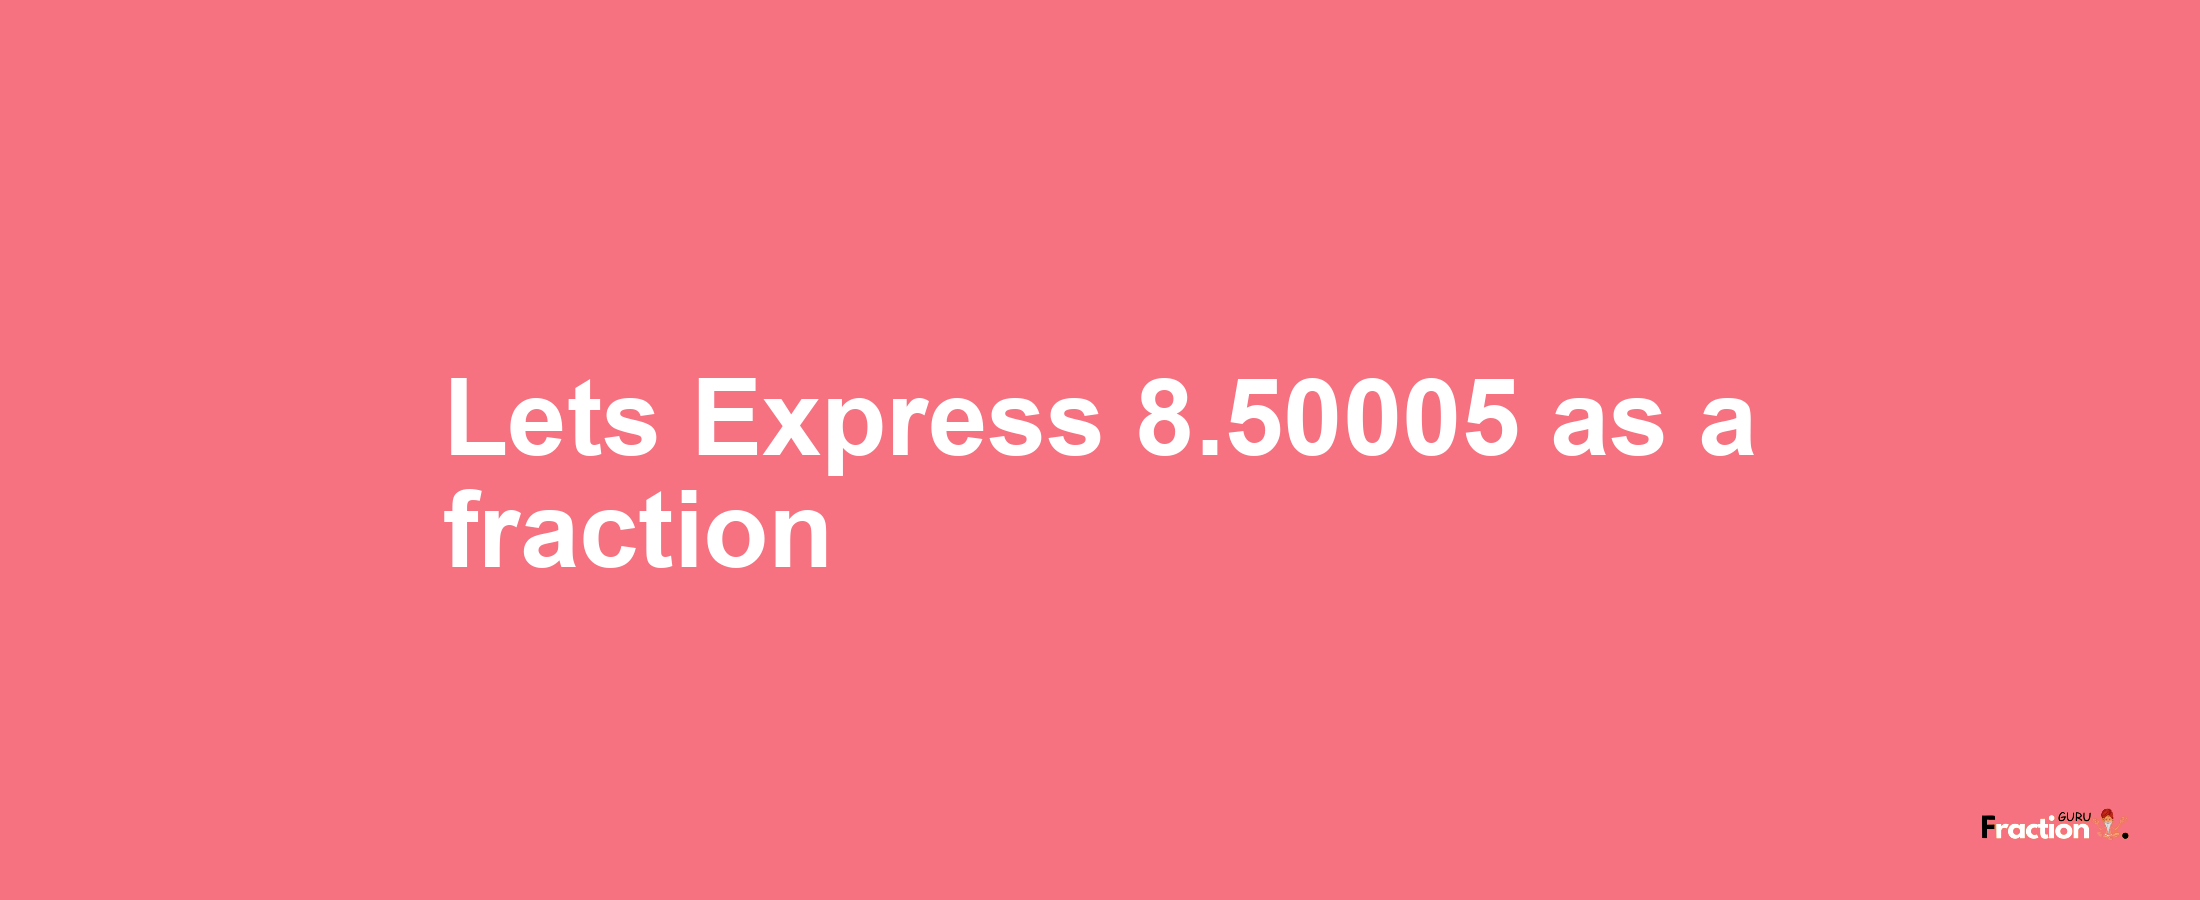 Lets Express 8.50005 as afraction